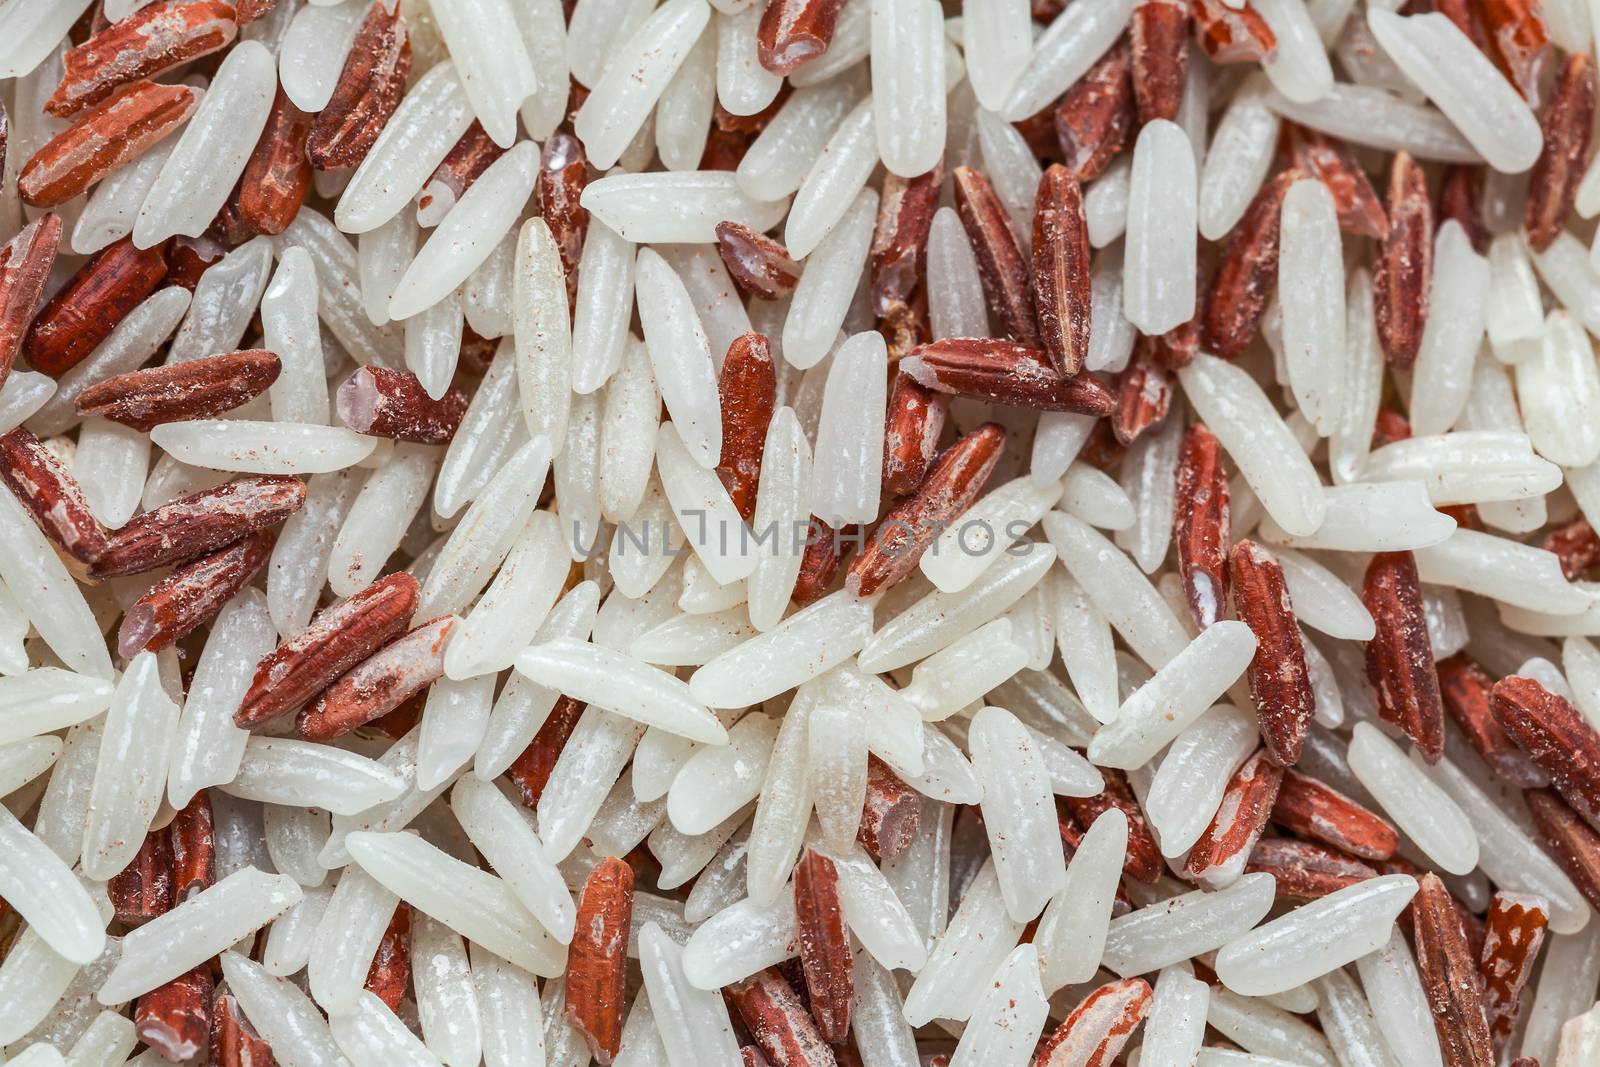 Brown Rice, destroyed by Red flour beetle, science names "Tribolium castaneum" or weevil are on brown rice, closeup